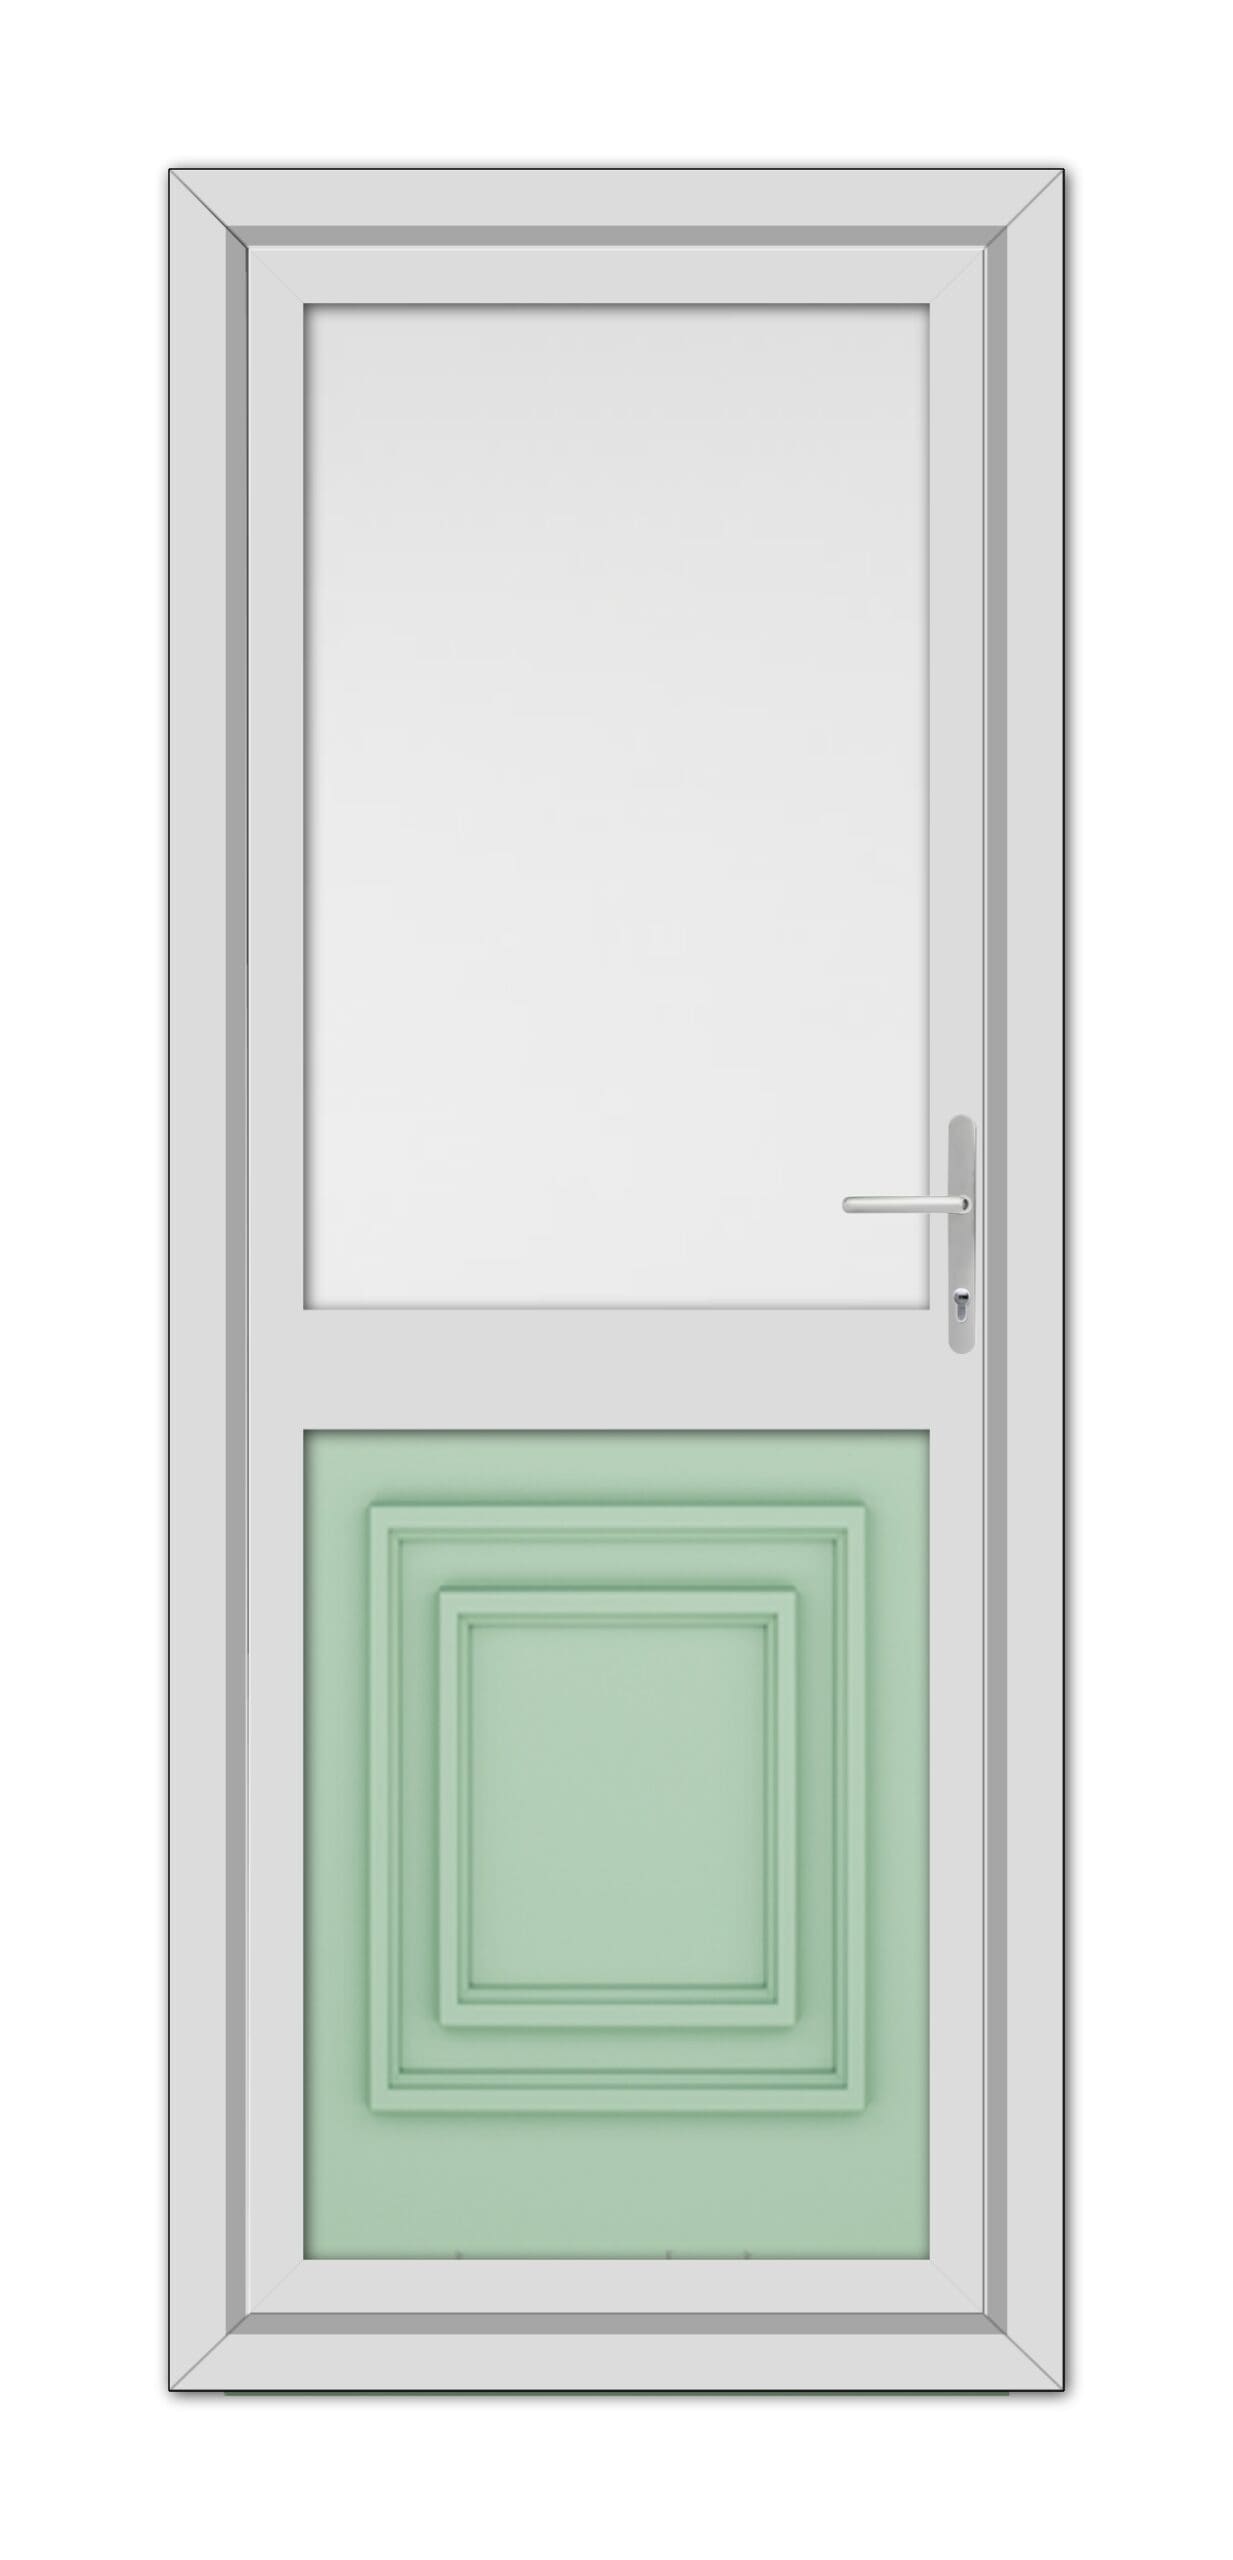 A modern closed door with a white frame and a Chartwell Green Hannover Half uPVC central panel, featuring a rectangular window at the top and a metallic handle on the right.